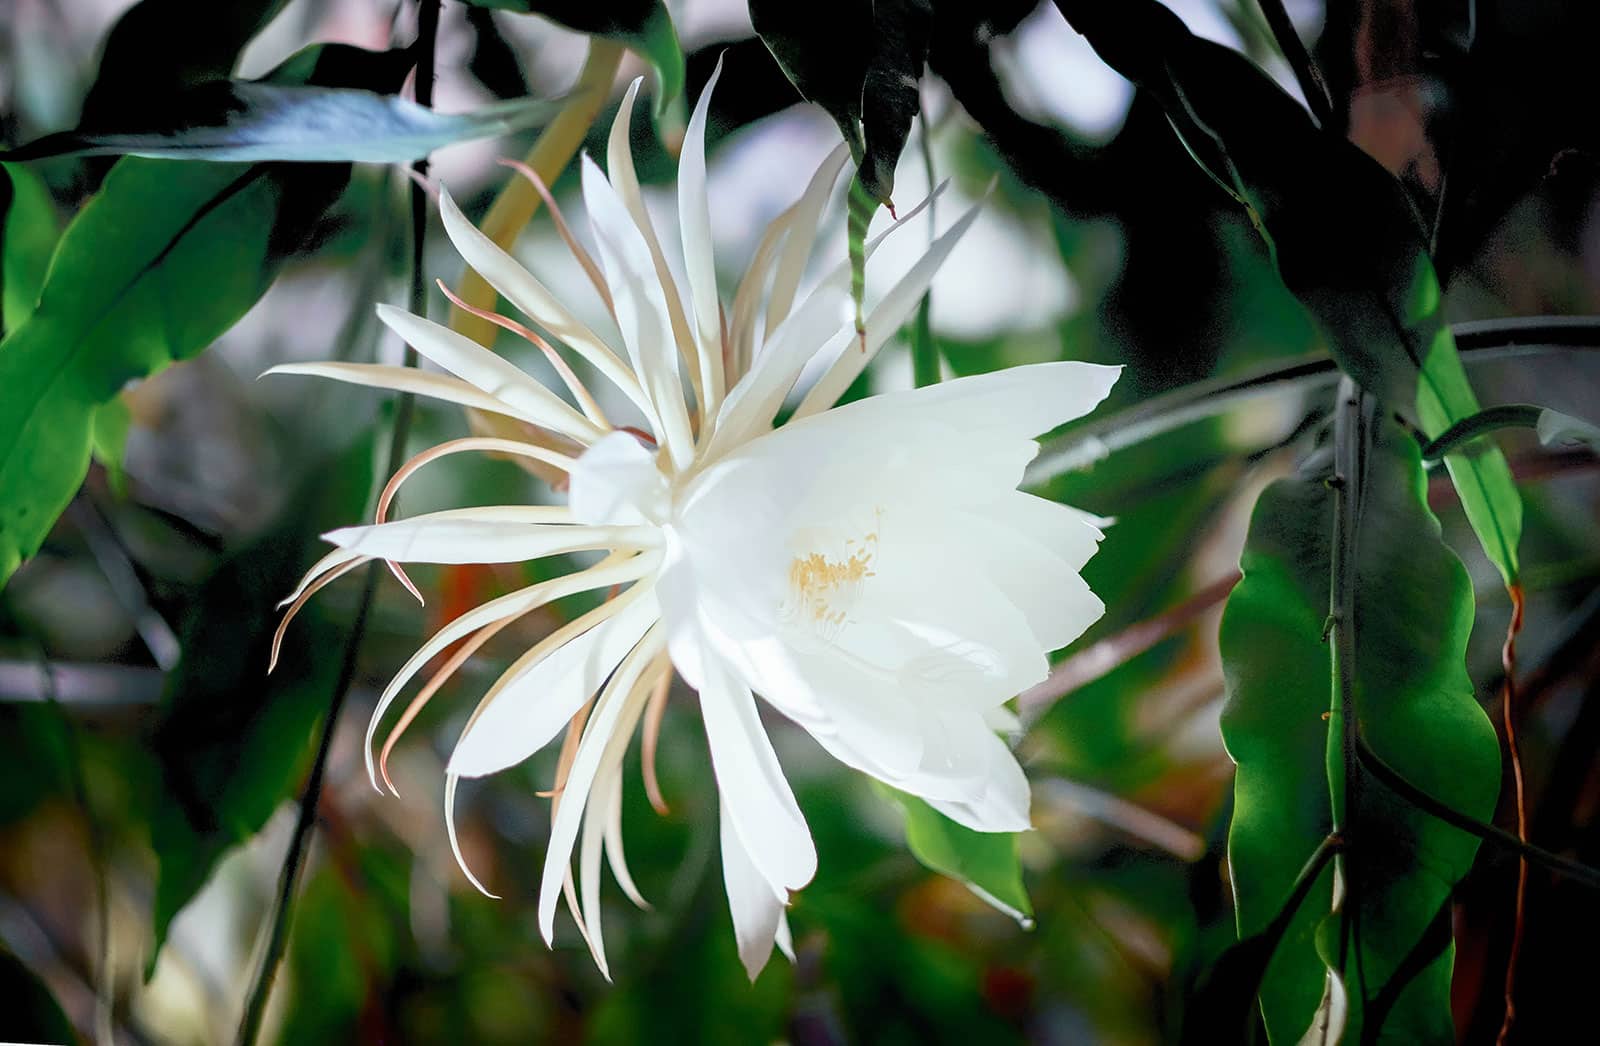 Spectacular white flower blooming at night on an orchid cactus (Epiphyllum oxypetalum)